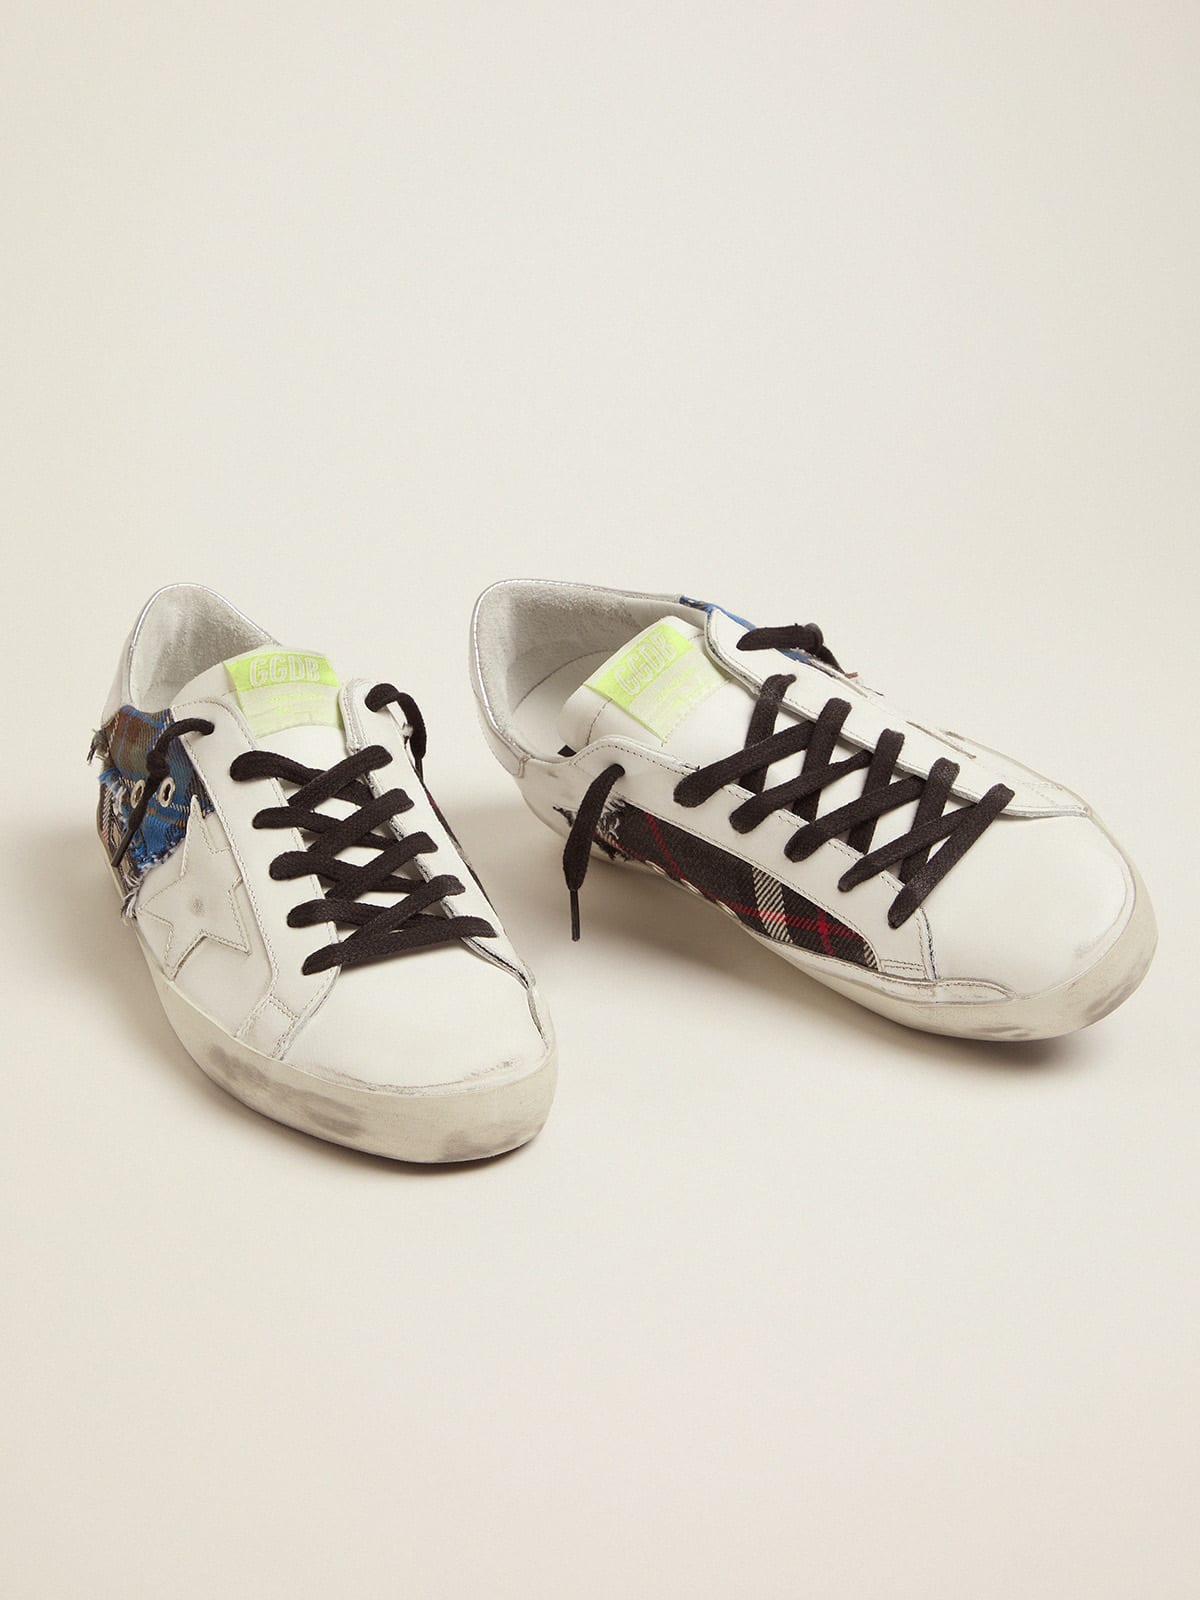 Golden Goose - Women's Limited Edition LAB white Super-Star sneakers with tartan insert in 